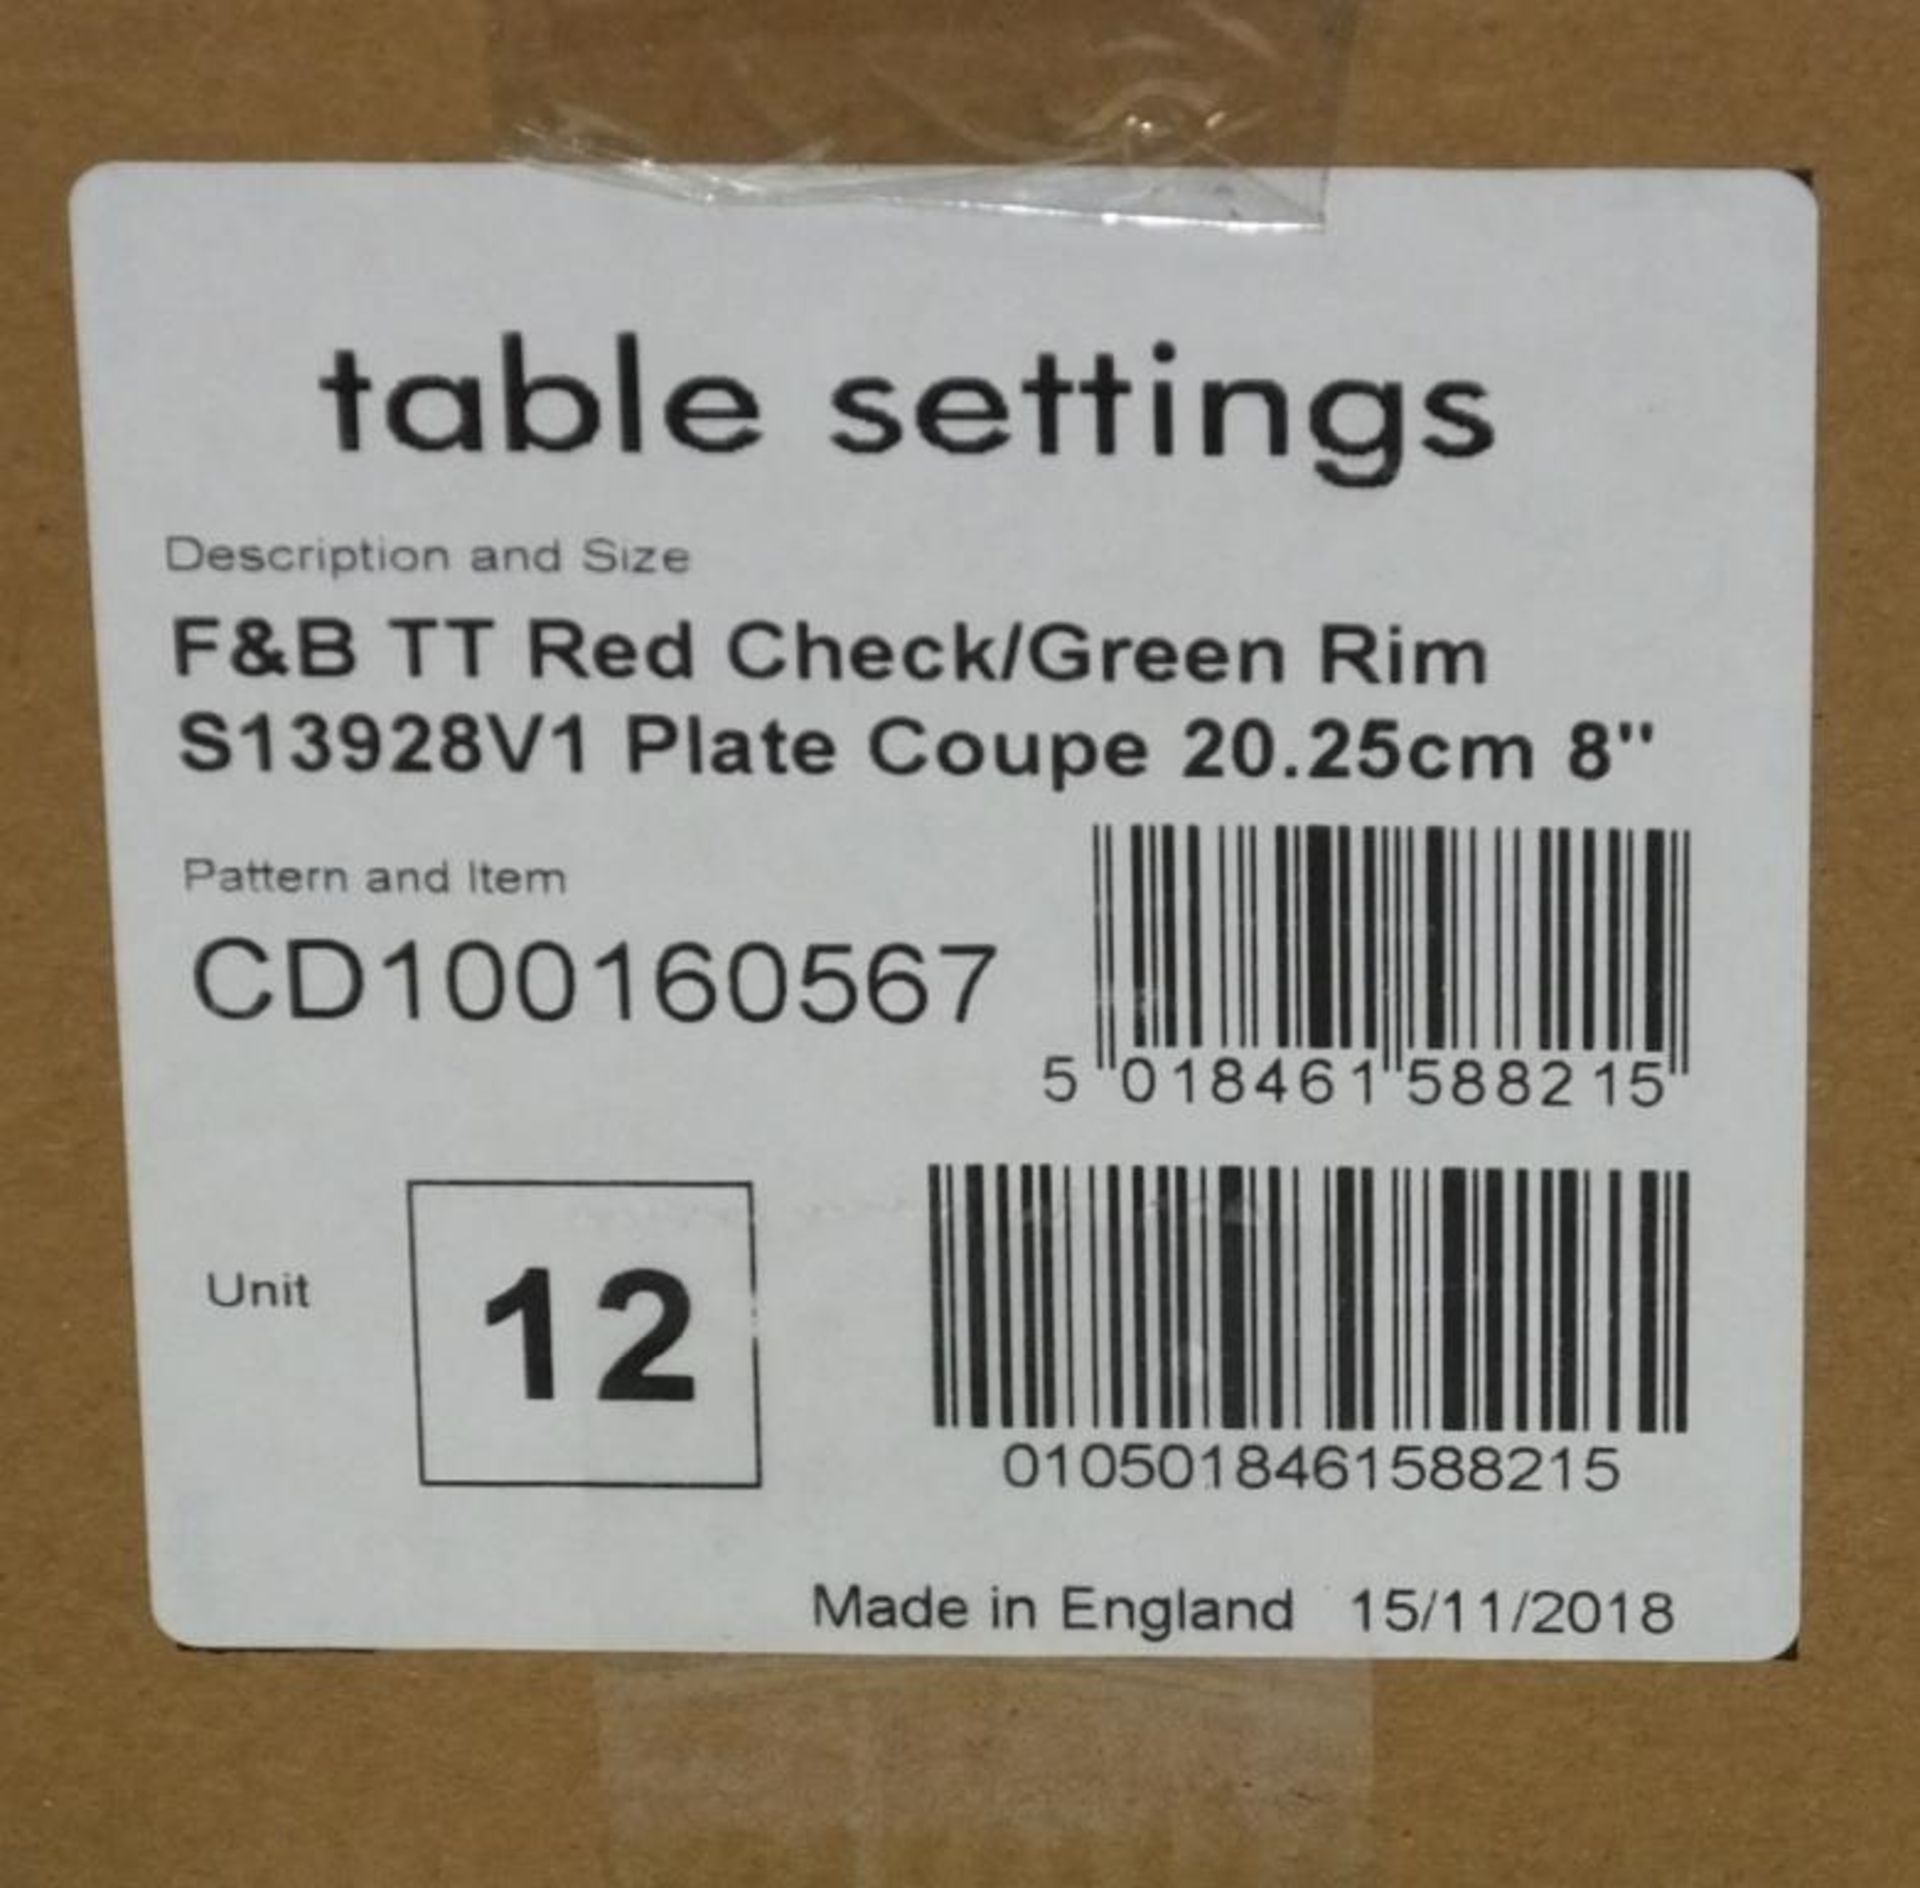 Steelite table setting plates - Red Check/Green Rim Plate Coupe 20.25cm / 8 in - 12 per box 6 boxes - Image 4 of 5